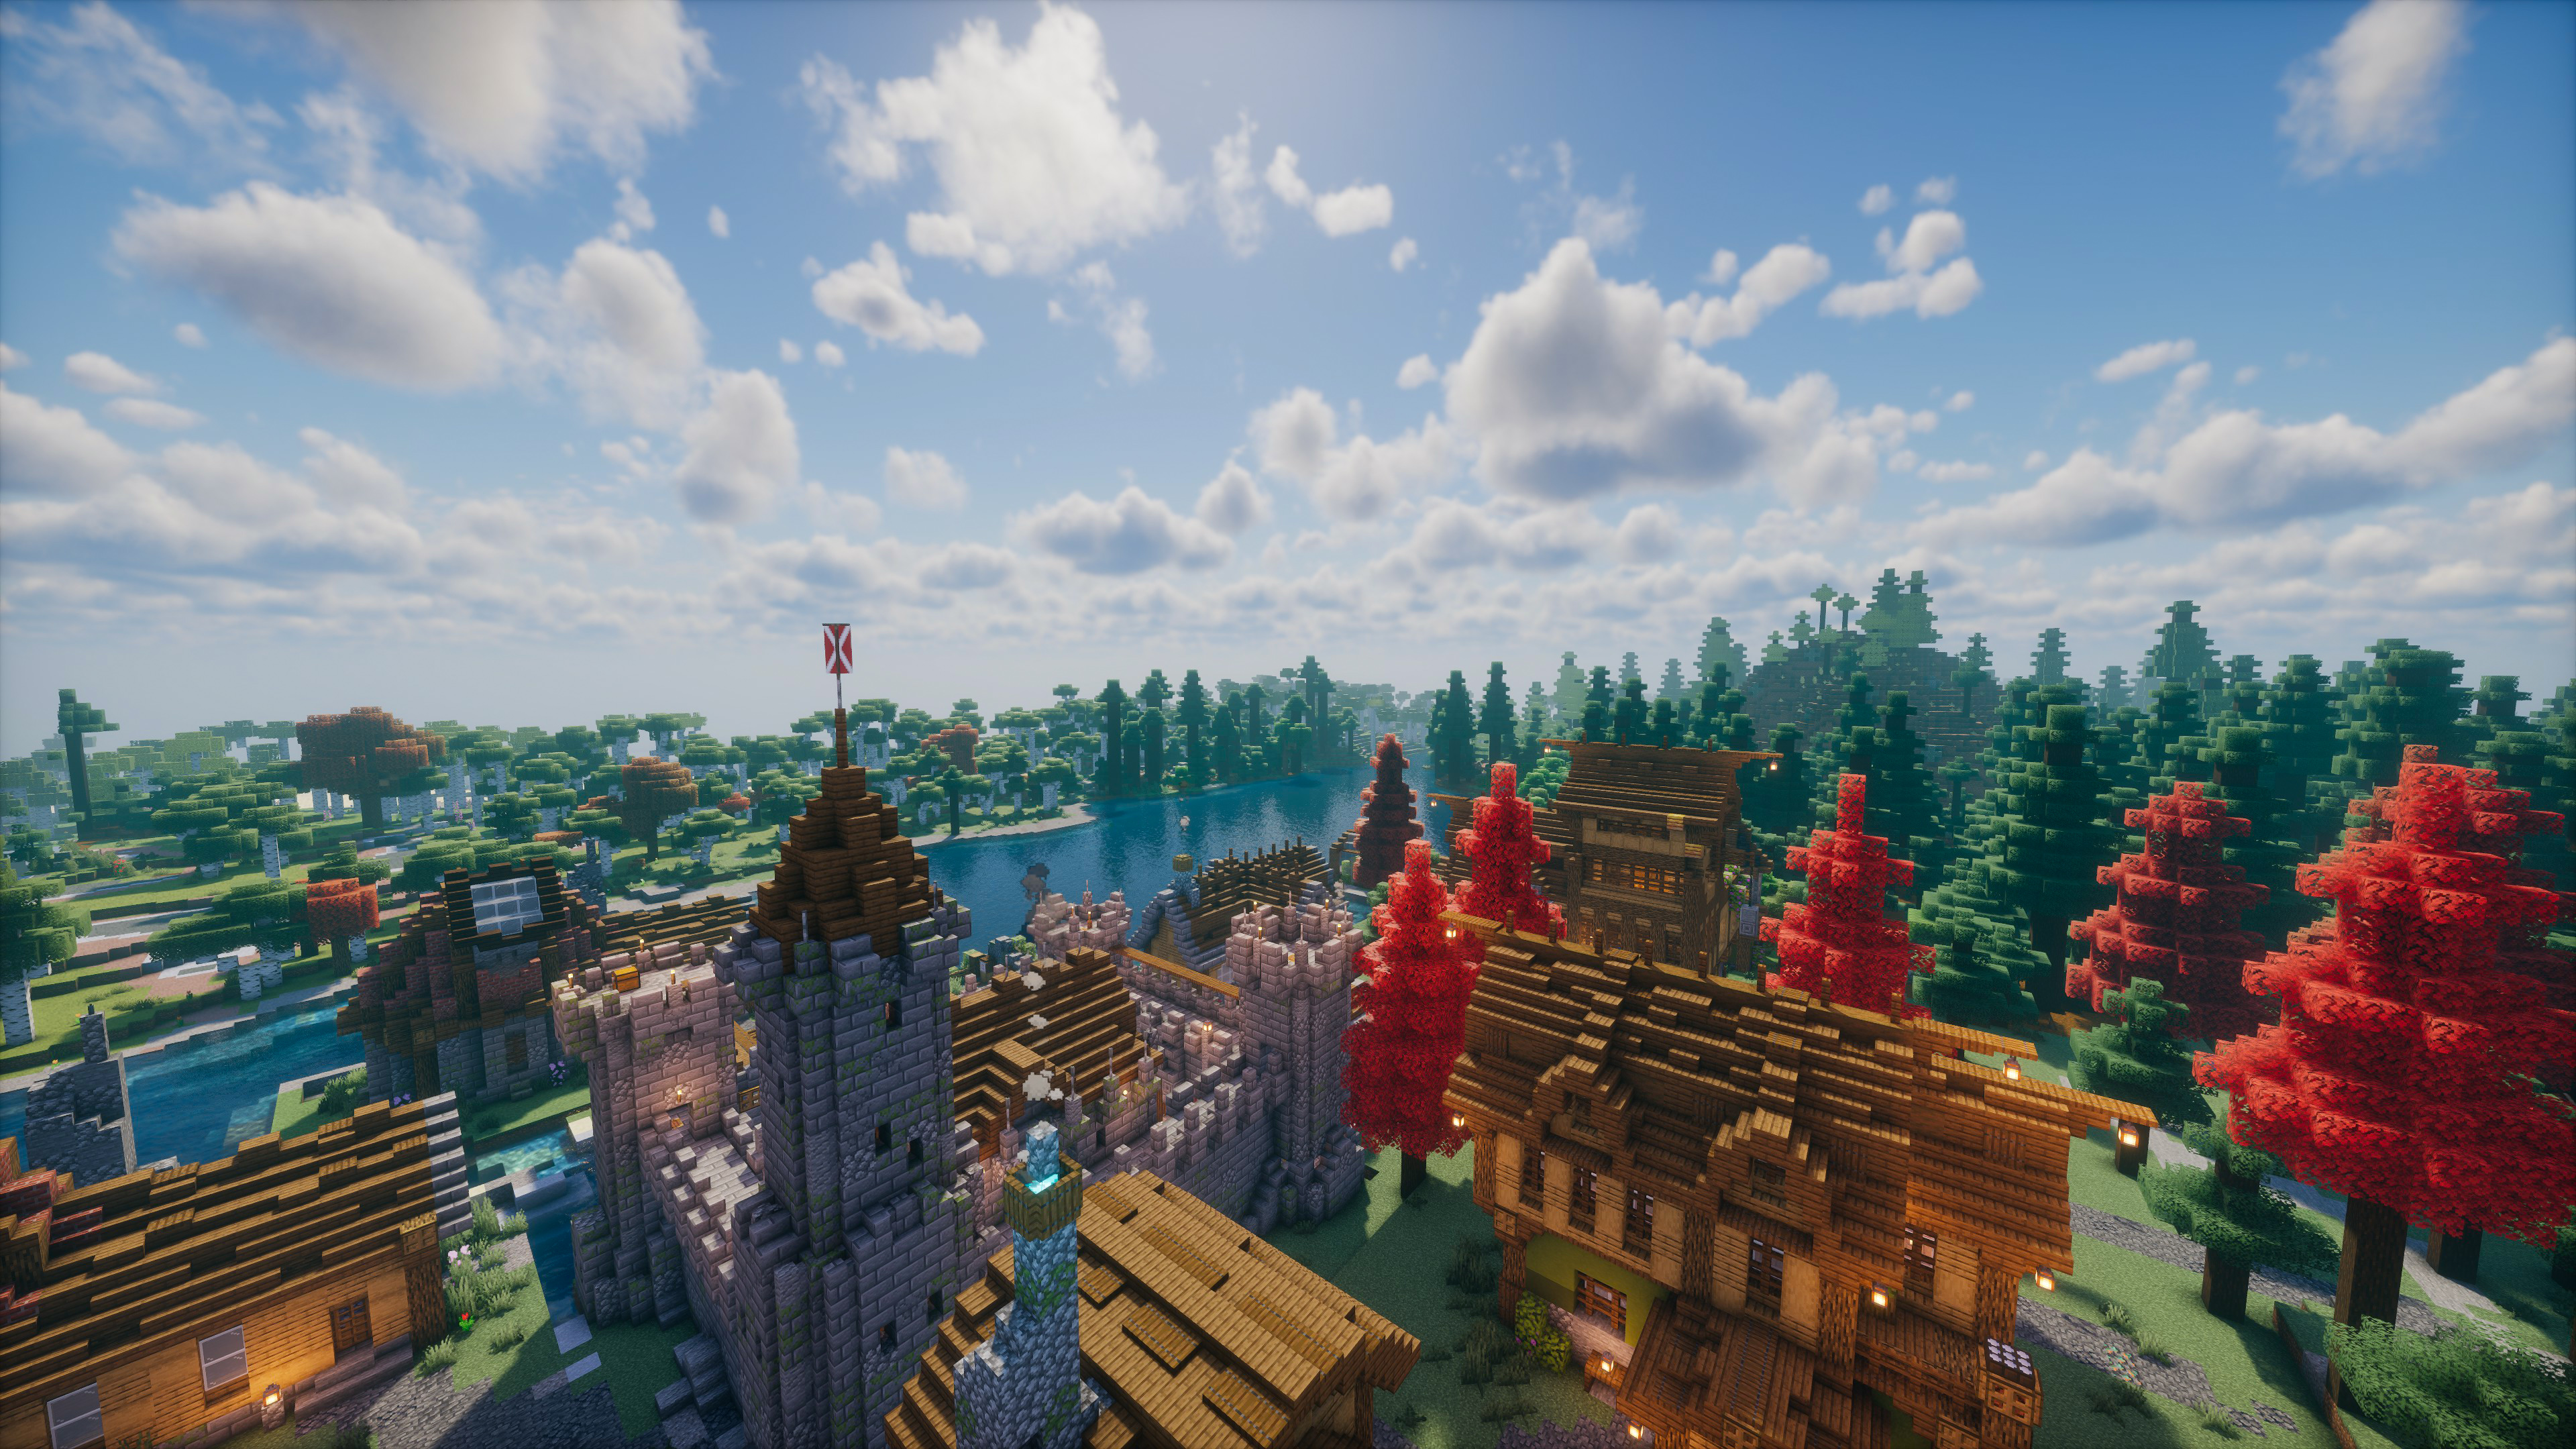 Minecraft Village Clouds River Forest Video Games CGi Sky Building Trees Water Sunlight Flag Landsca 3840x2160